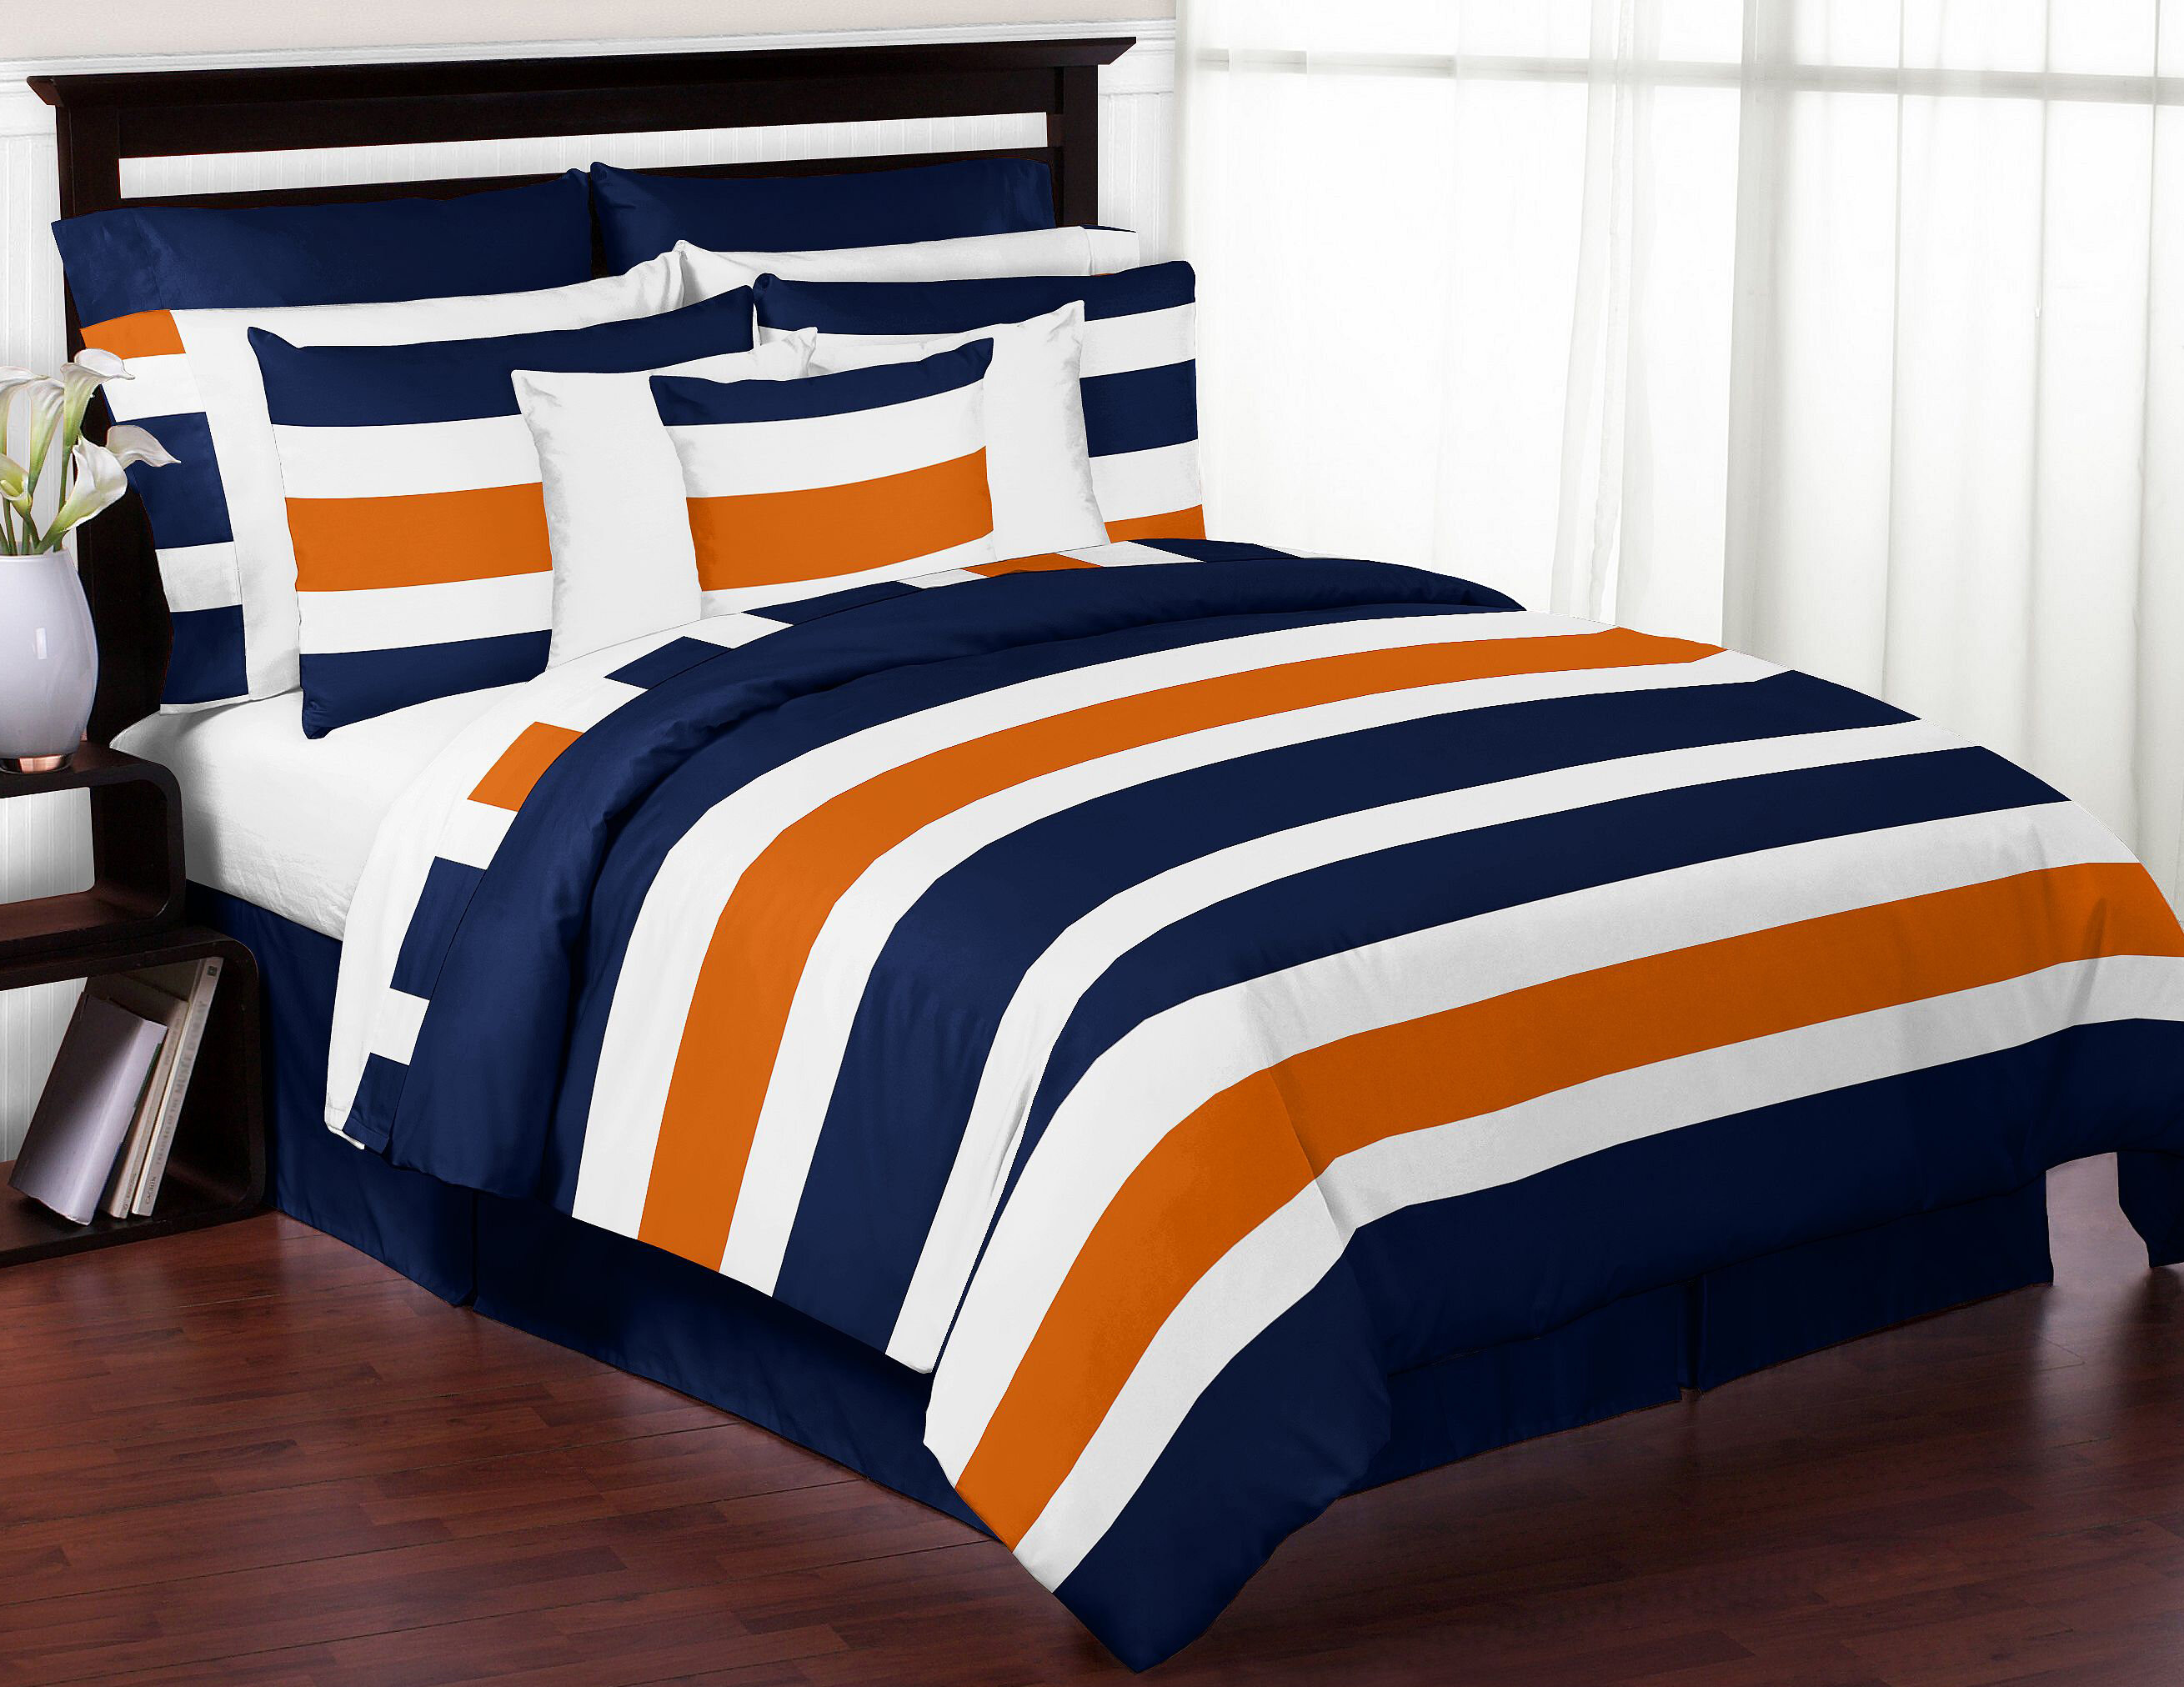 Details about   Navy Blue Yellow Bears Lodge 7 pc Comforter Sheet Set Twin Full Queen Bed Bag 